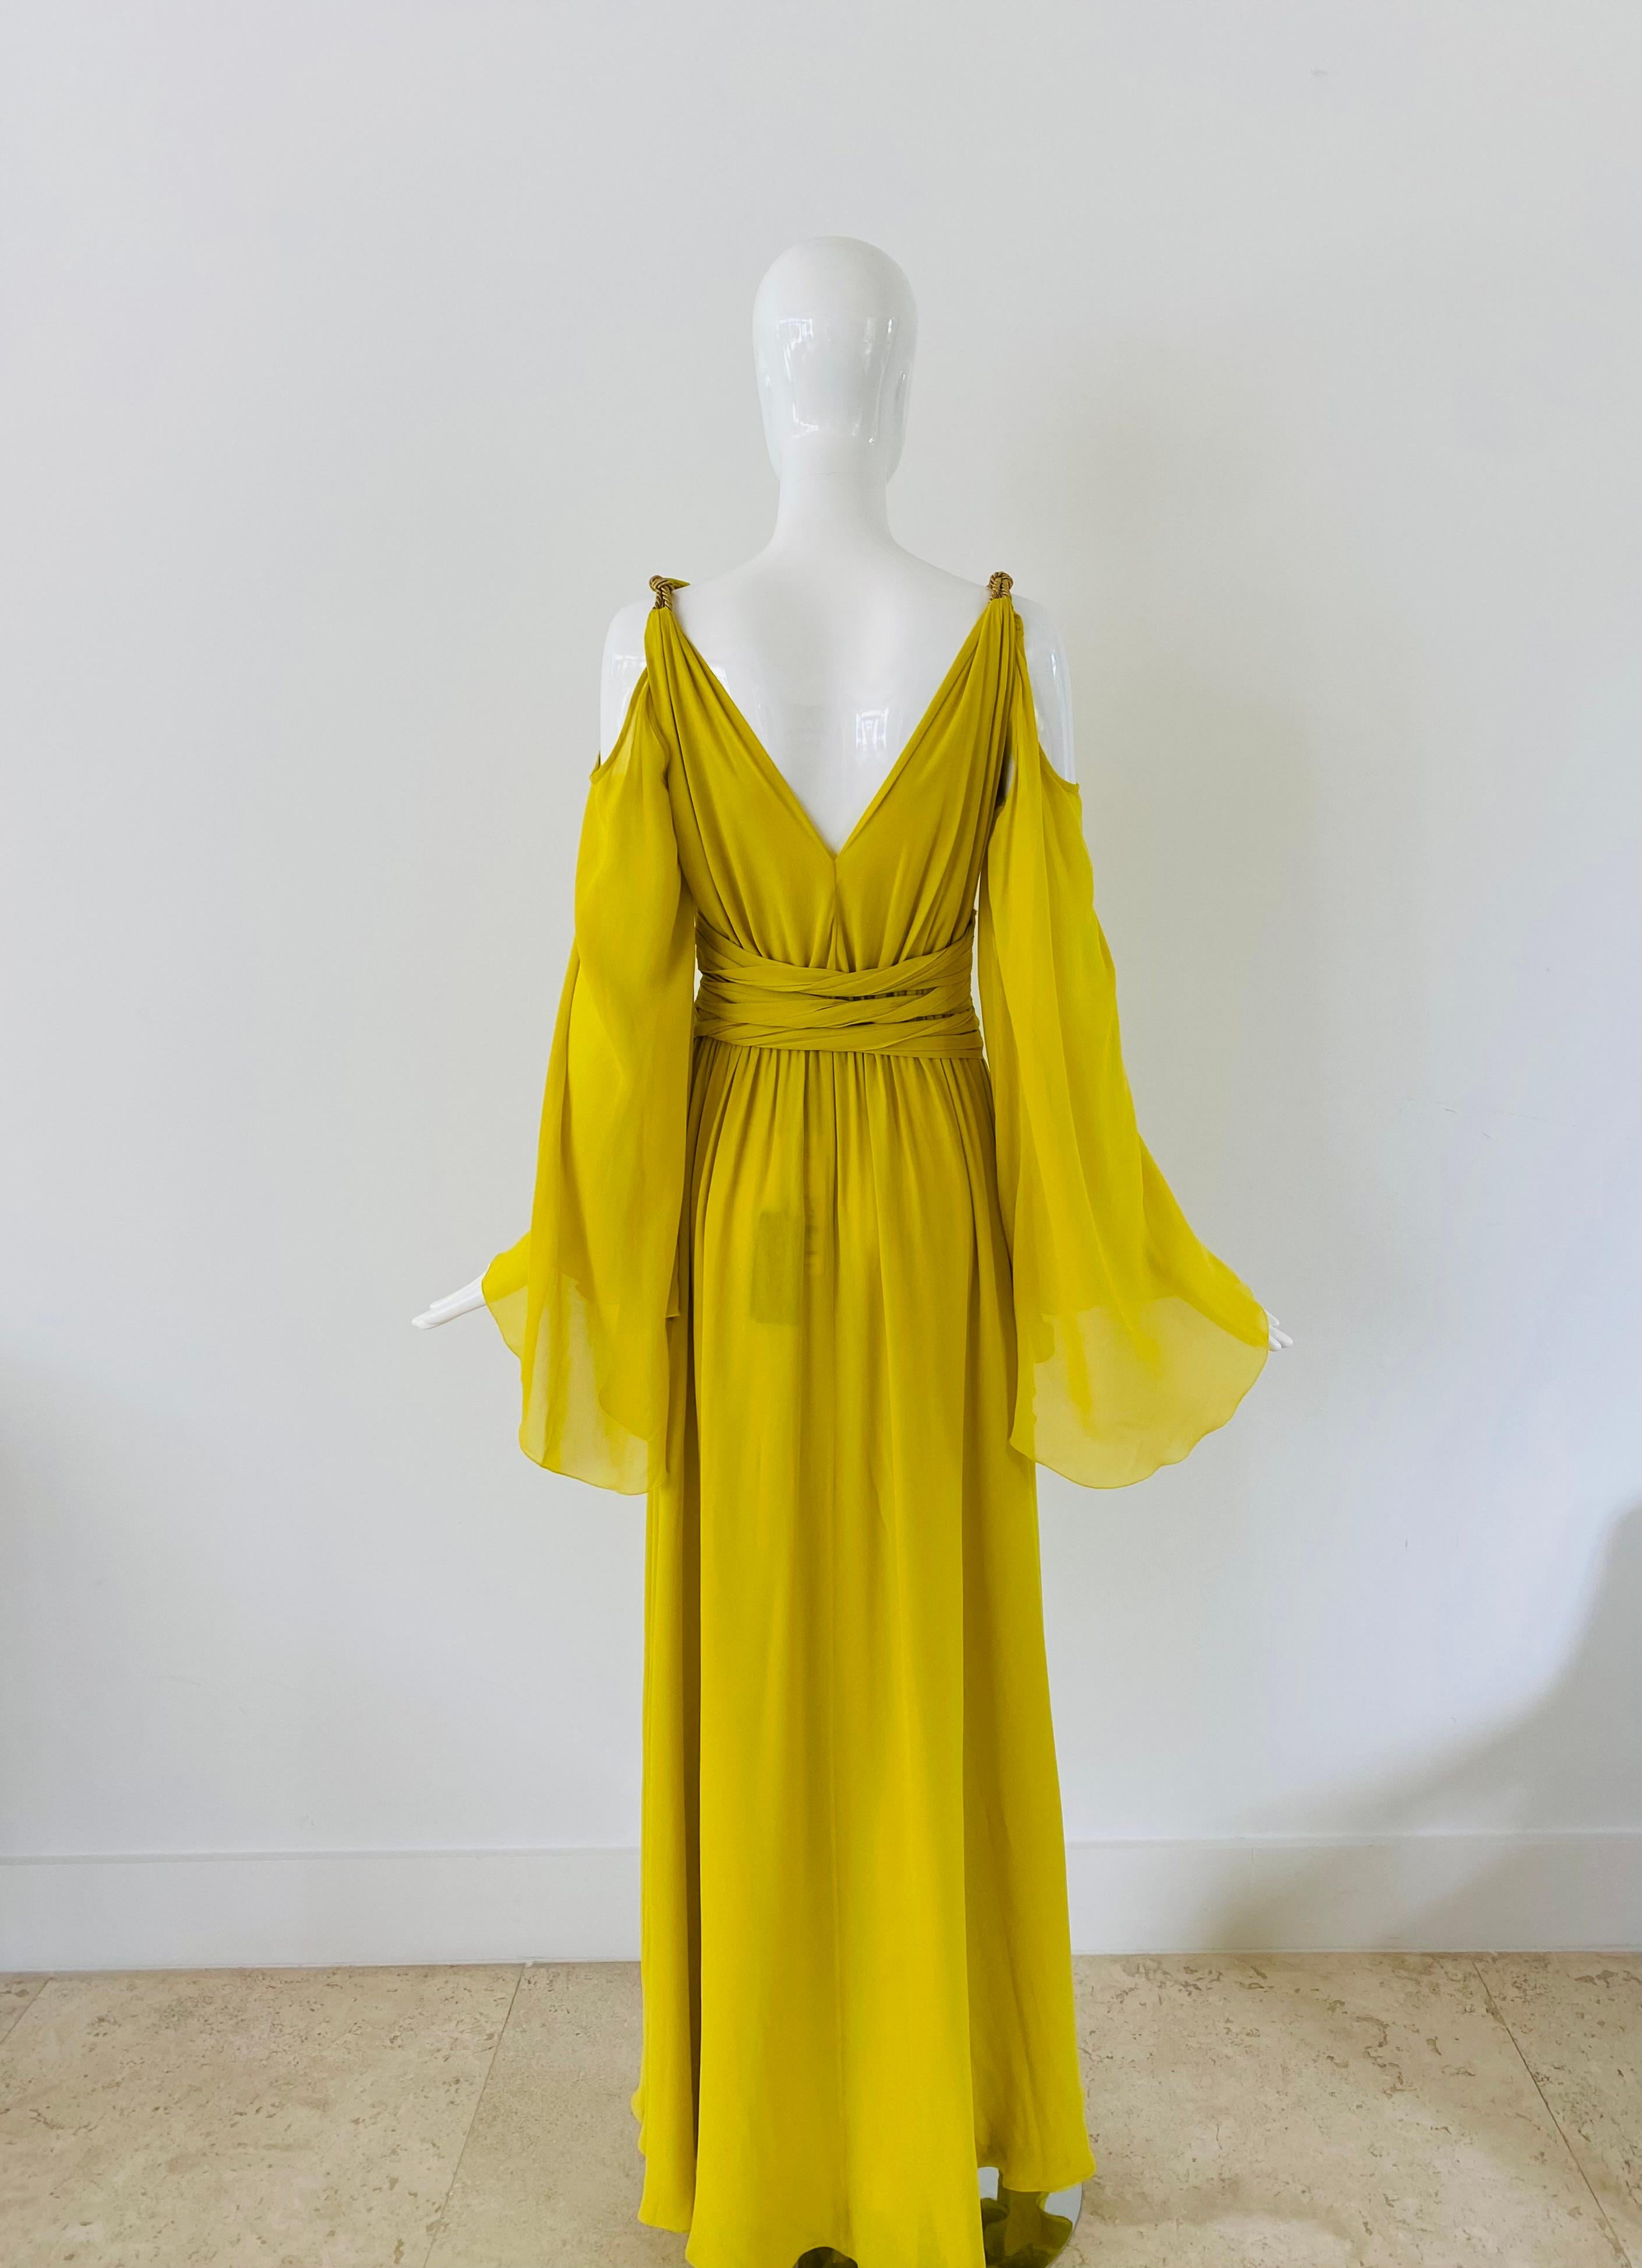 Modern gown by Peter Dundas' namesake label.  He has previously been the Creative Director for Pucci and Roberto Cavalli. He is known for his glamorous and feminine designs, and this long formal yellow silk gown is no exception. This dress is